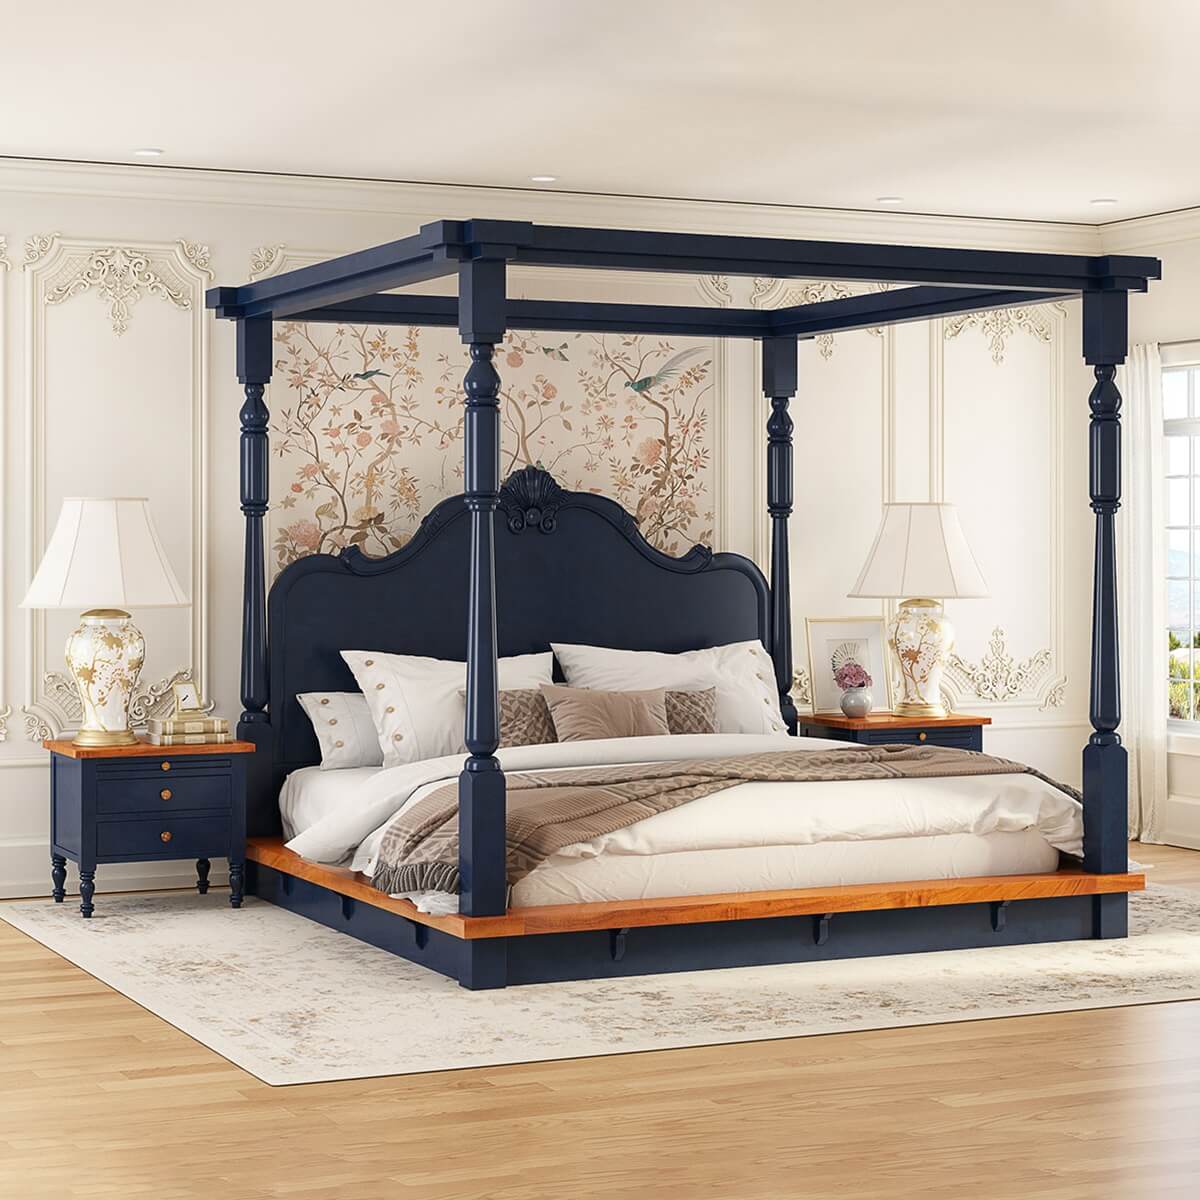 Repton Solid Wood Low Profile Platform Canopy Bed Frame w Tall Headboard